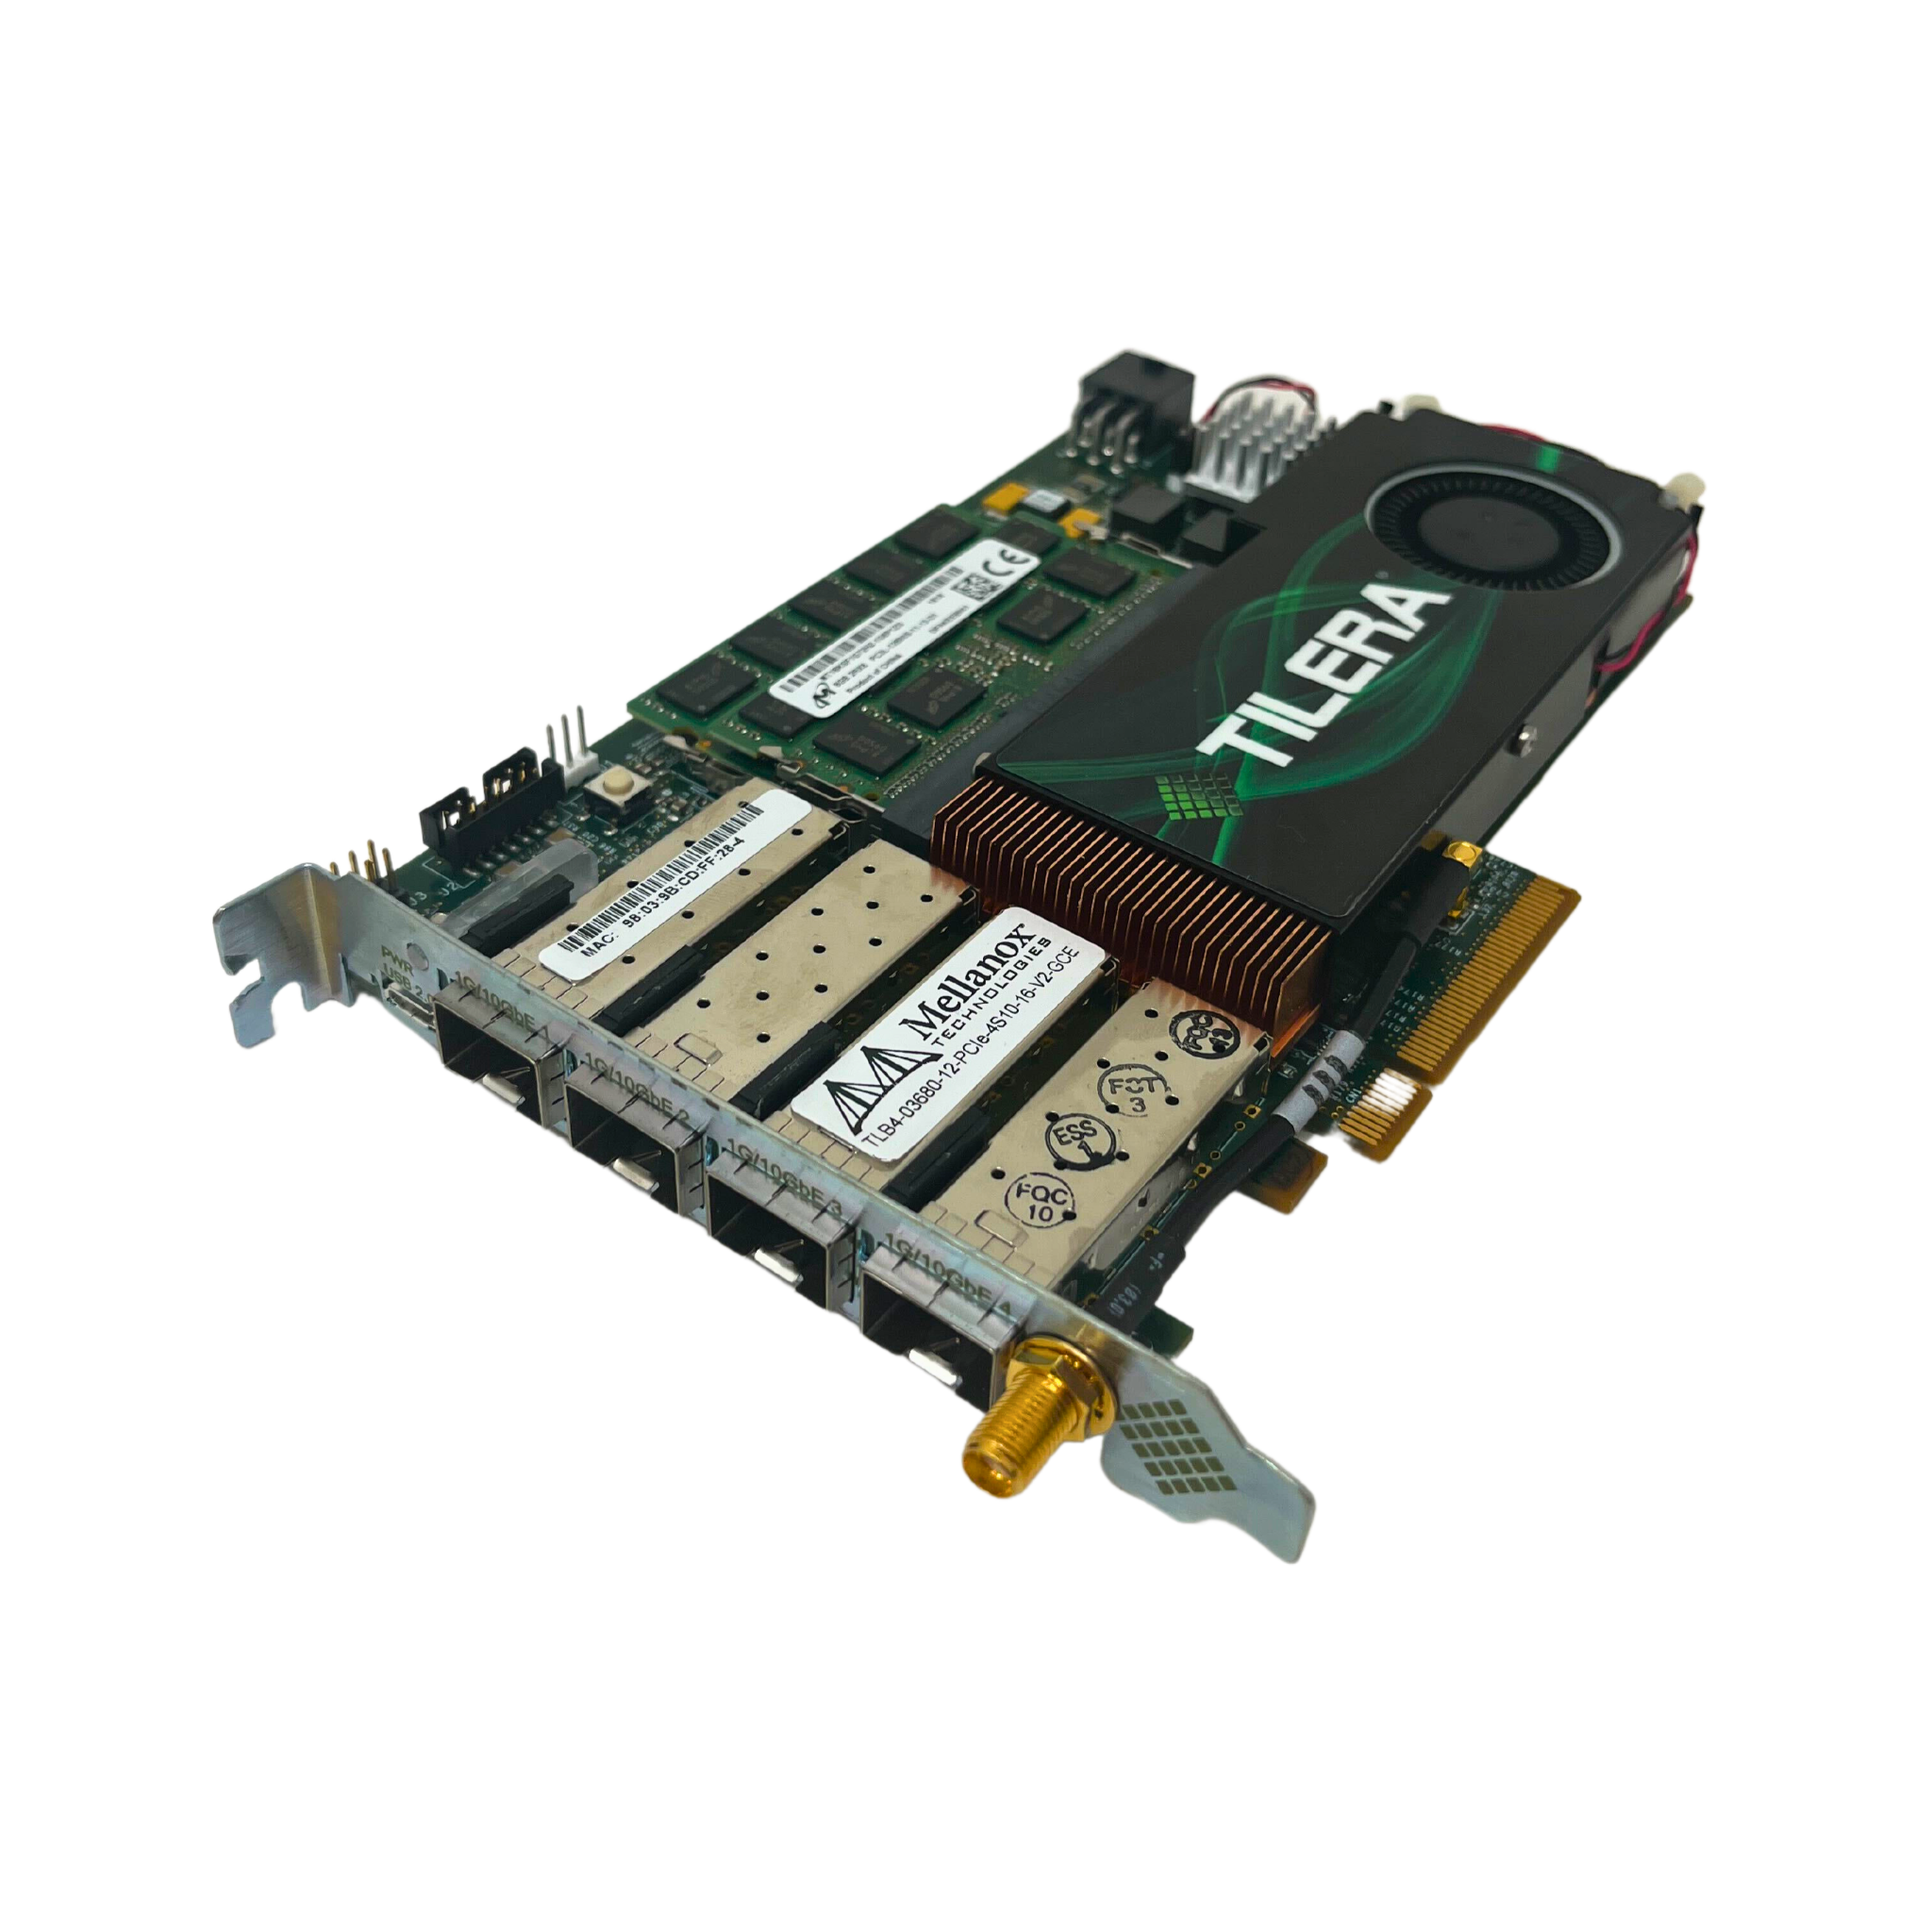 TILERA adapter with 1.2GHz Gx36 processor 4x10GE SFP/SFP+ ports 16GB w/crypto acceleration (TLB4-03680-12-PCIe-4S10-16-v2-GCE)